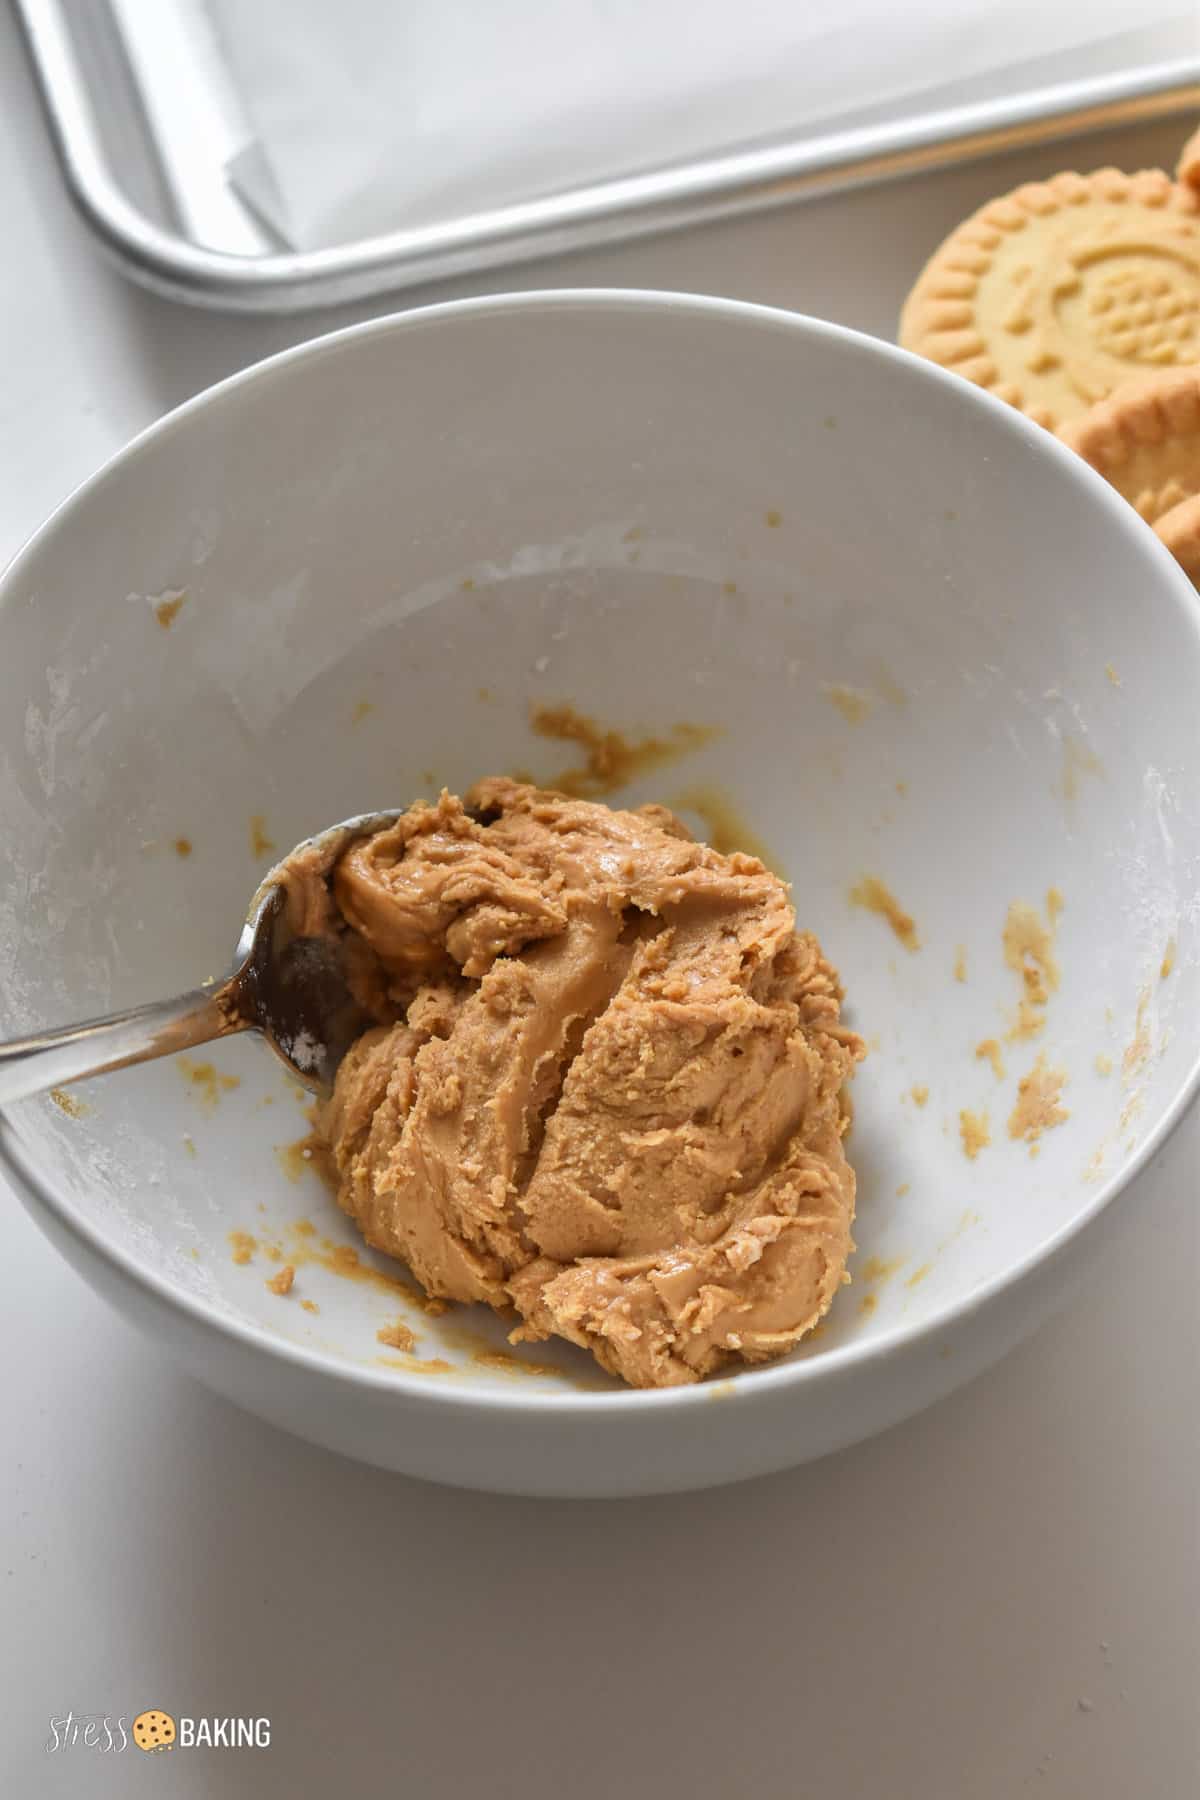 Peanut butter mixture in a small white bowl